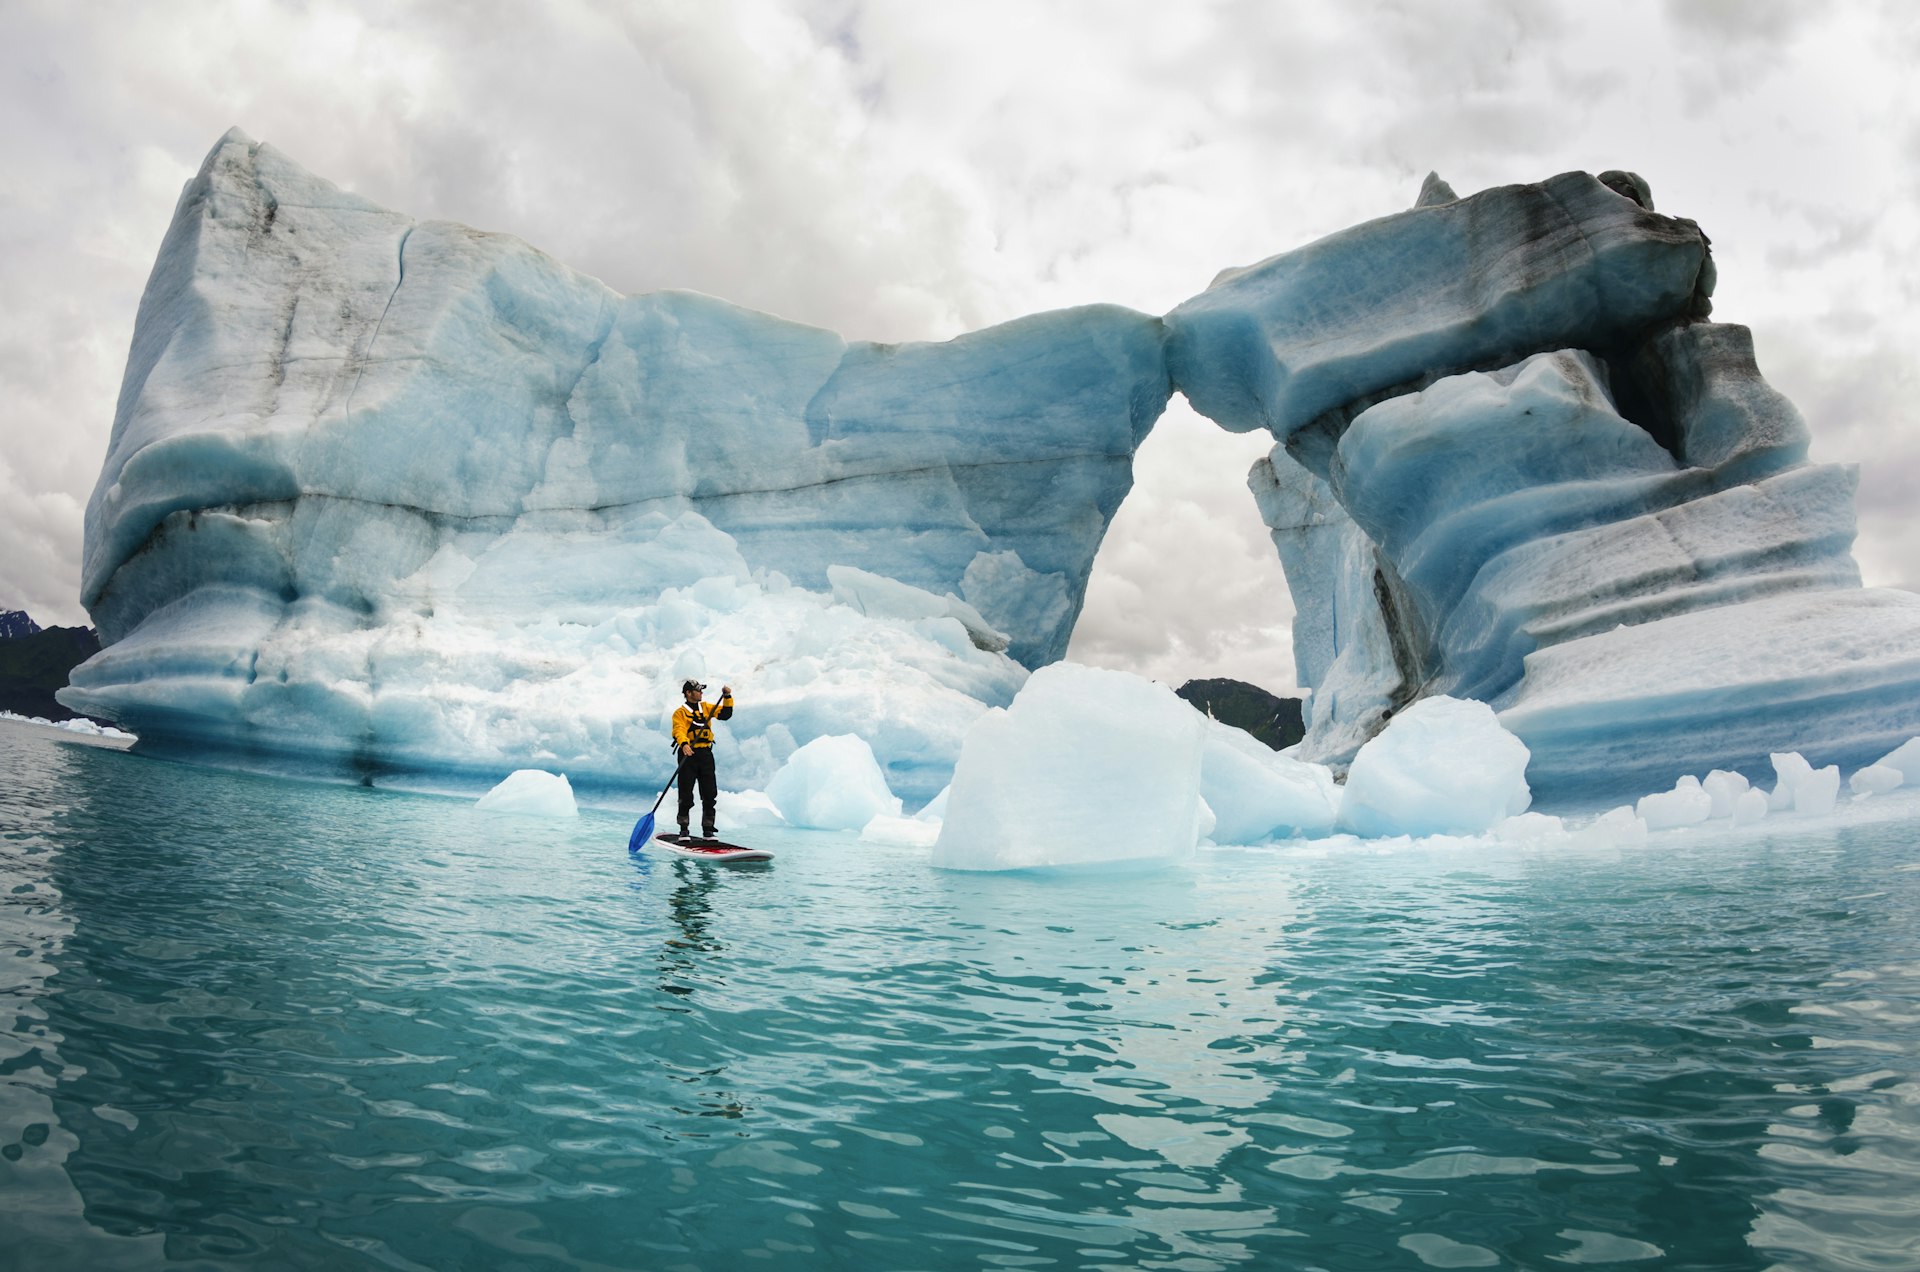 One man on stand up paddle board (SUP) paddles past hole melted in iceberg on Bear Lake in Kenai Fjords National Park, Alaska.